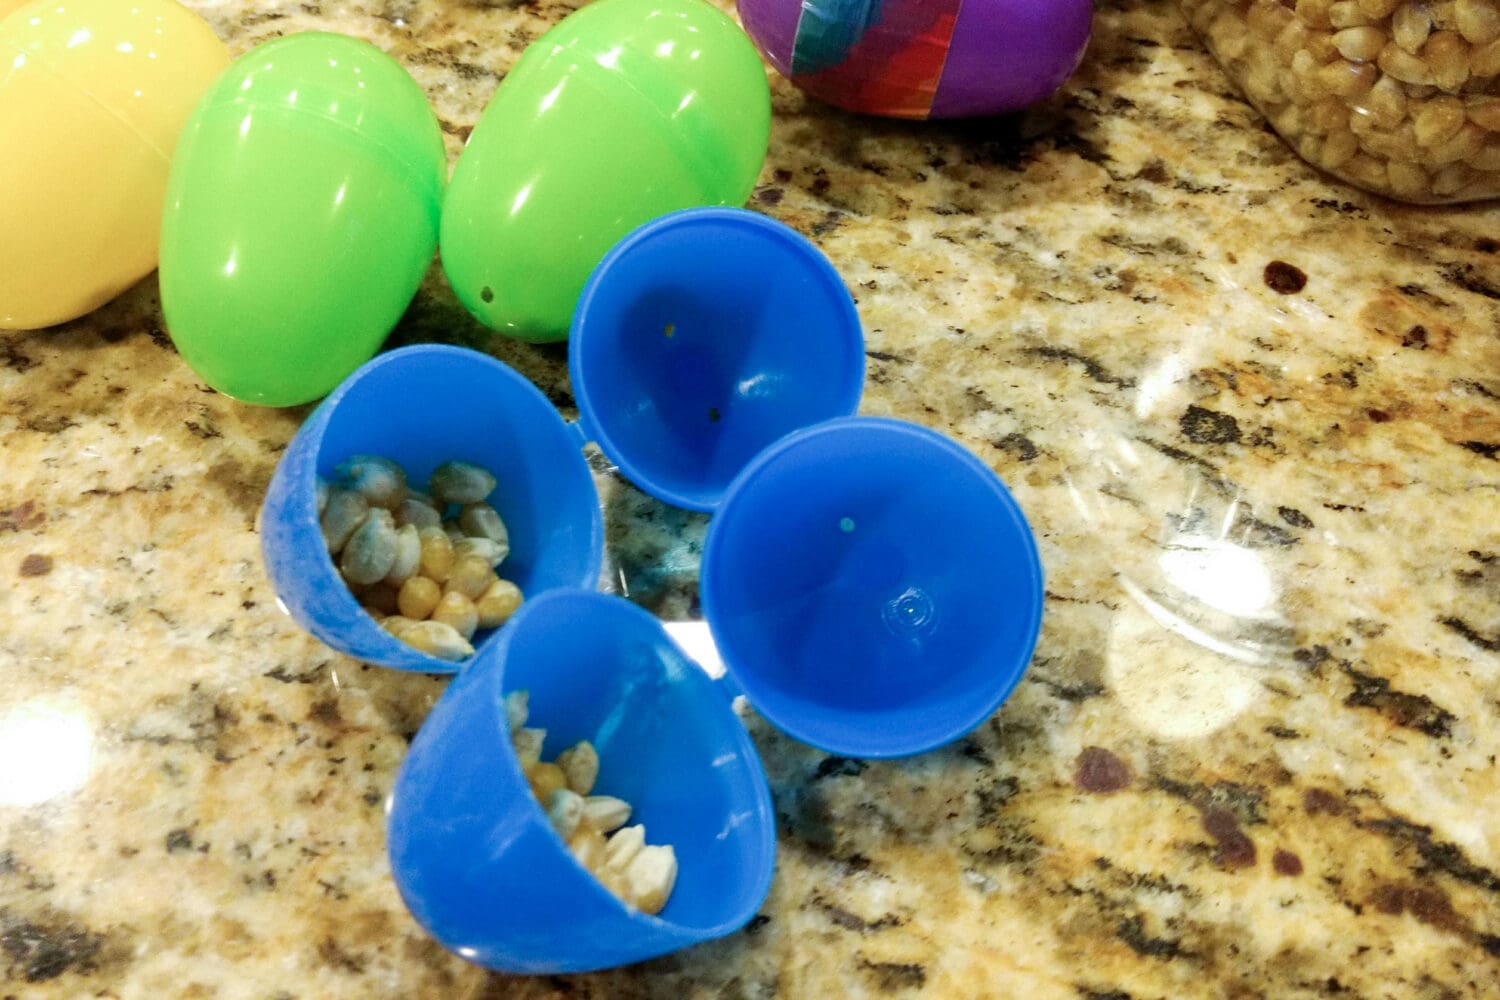 Filling homemade egg shakers with popcorn seeds in plastic Easter eggs